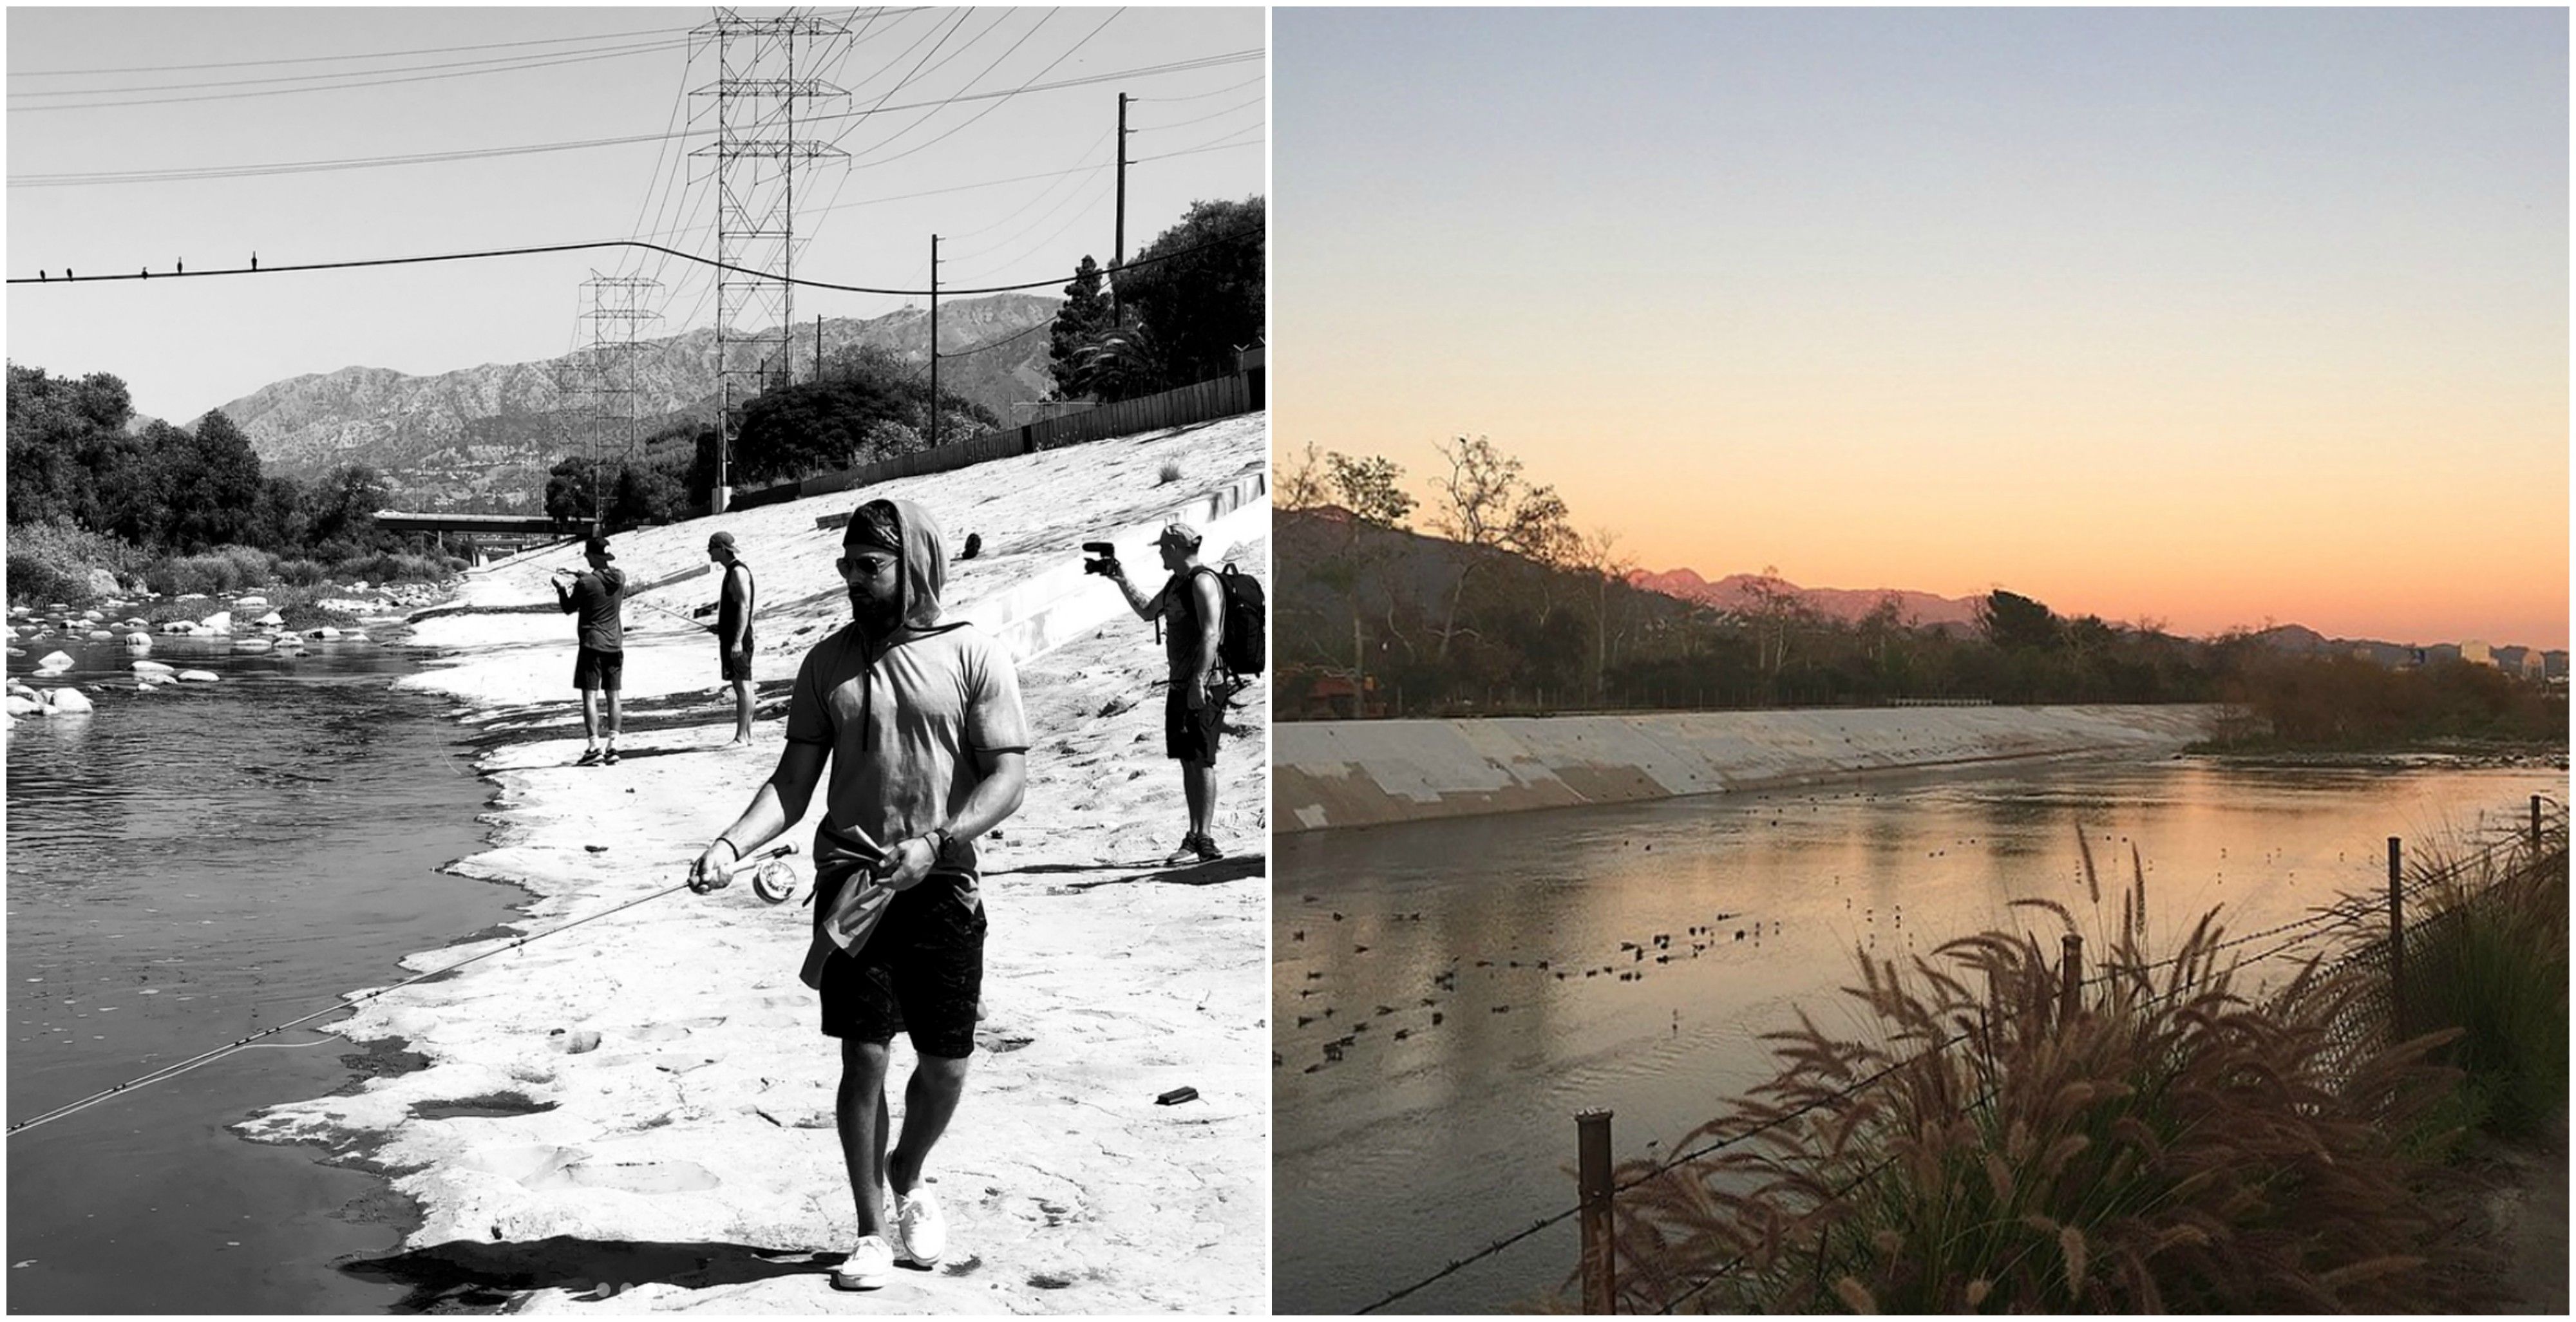 Zac Efron flyfishing on the Los Angeles river